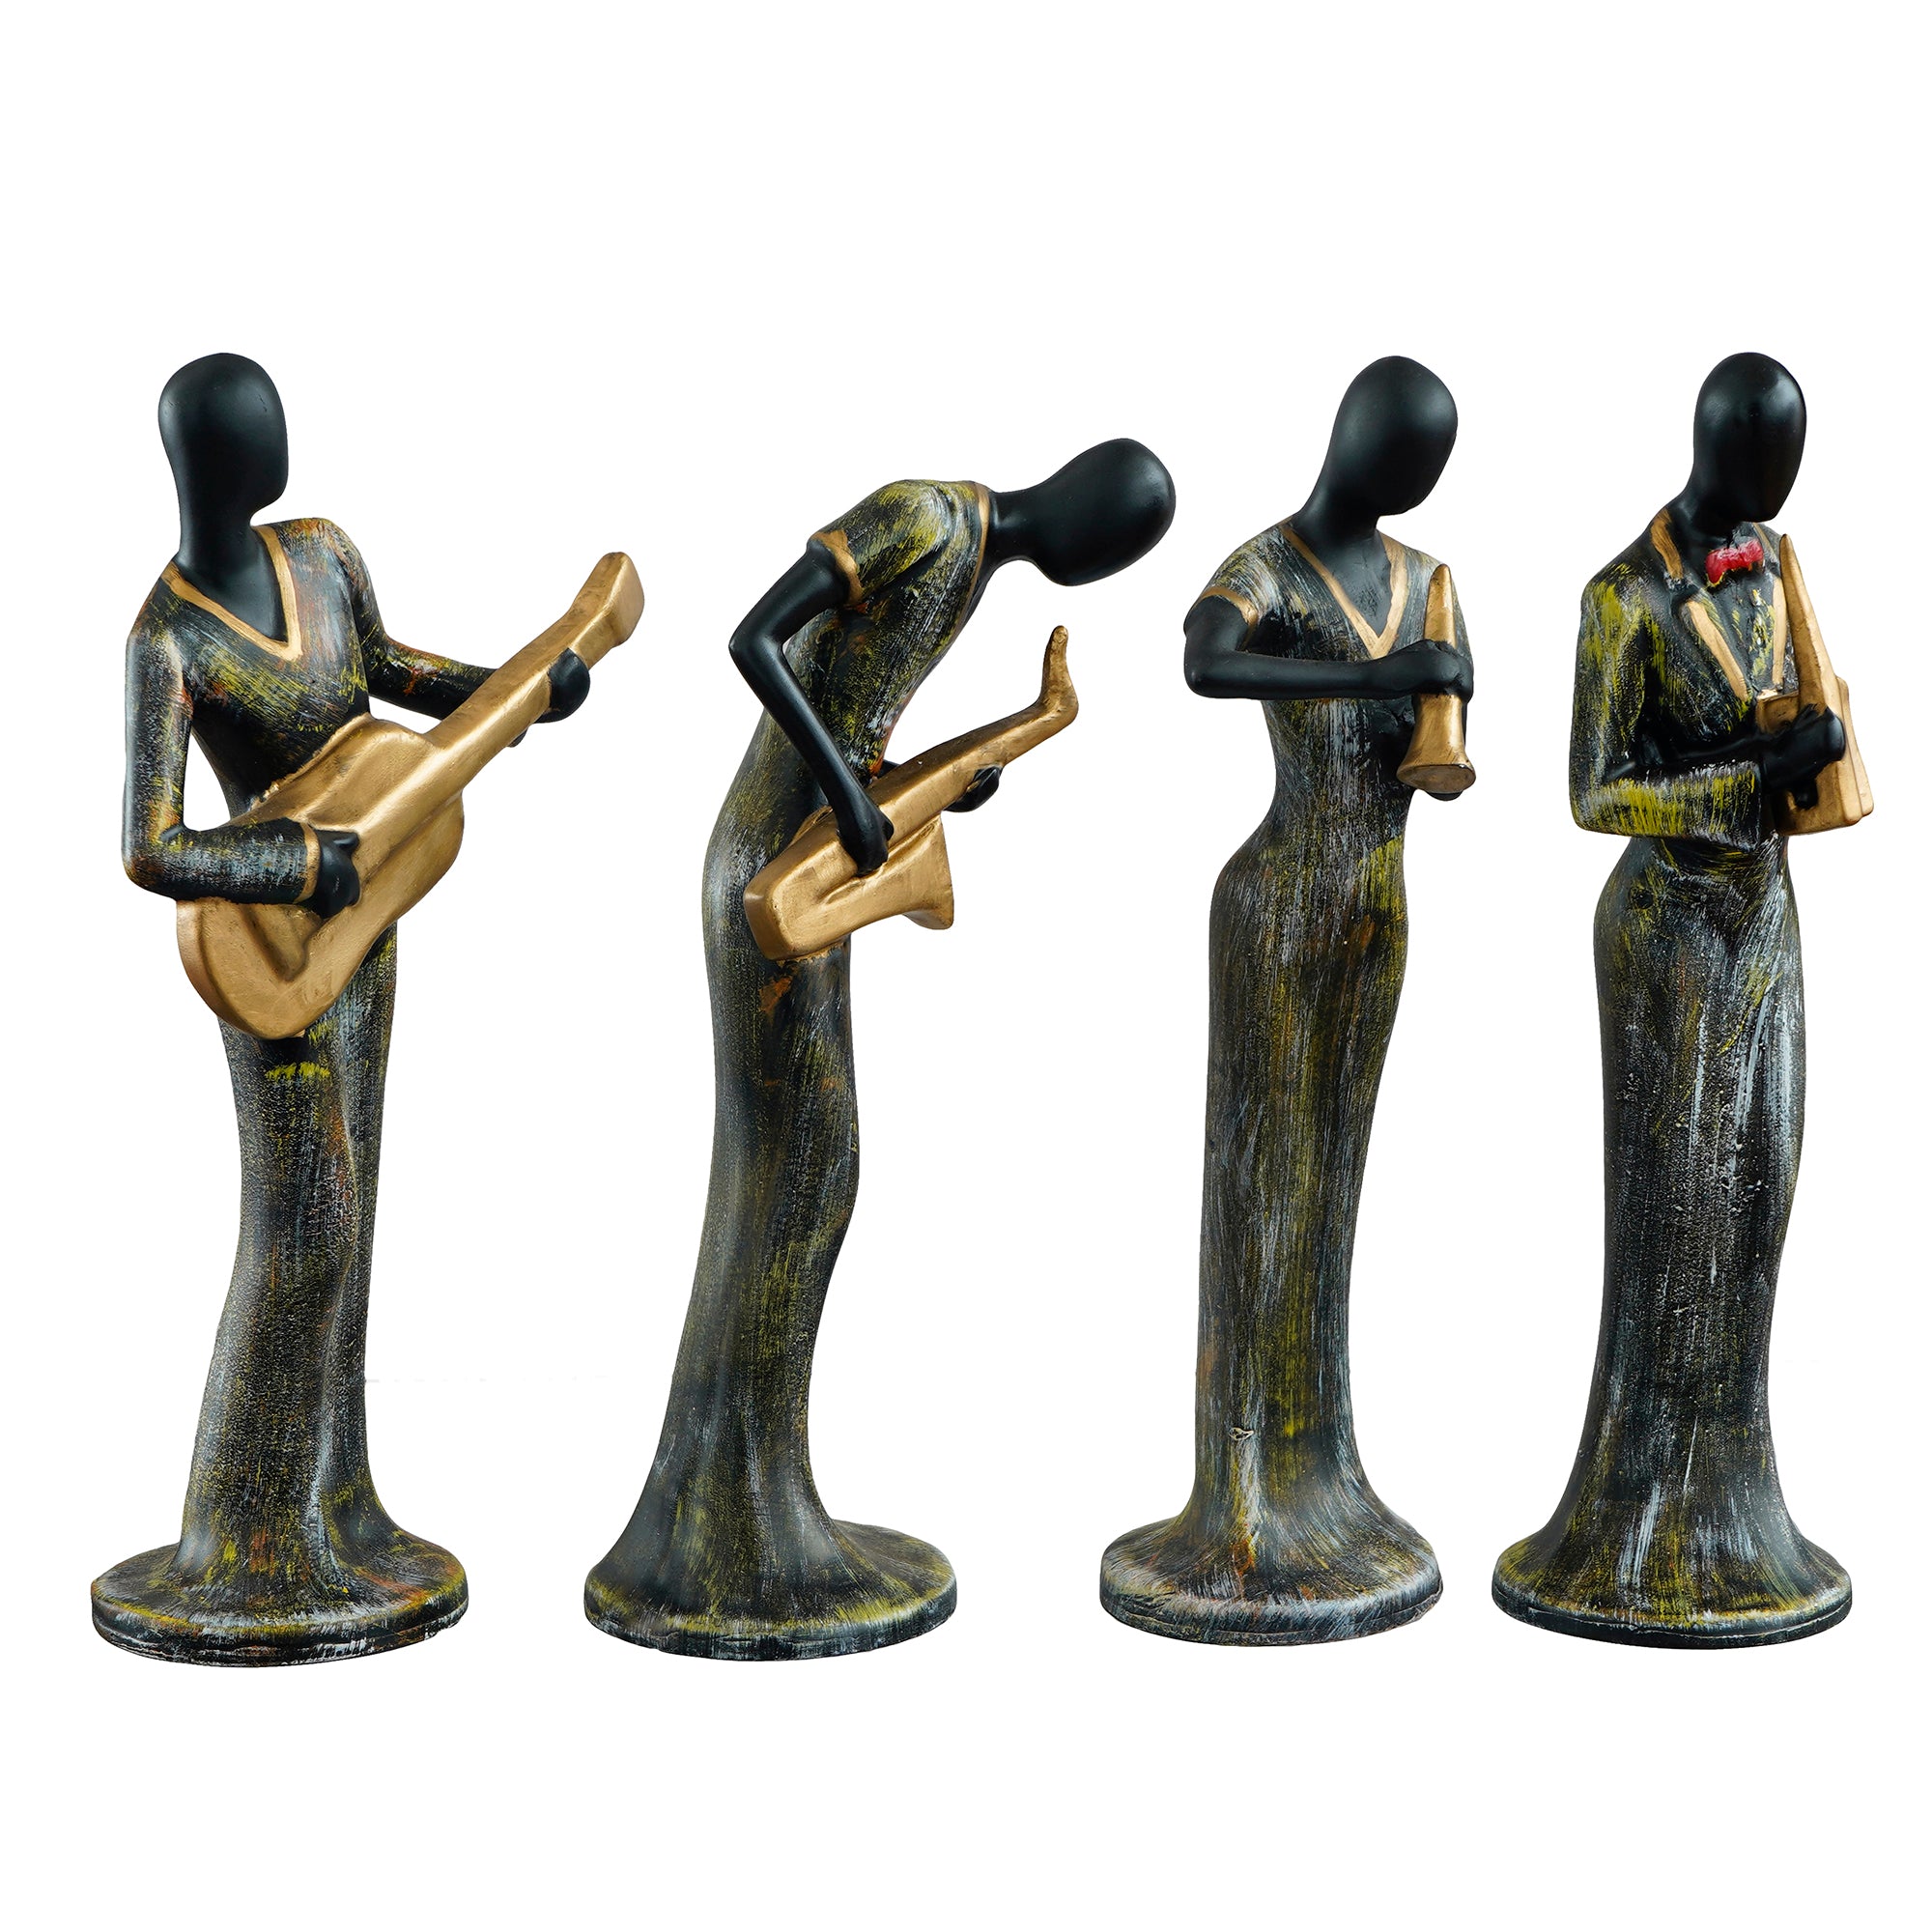 Grey and Black Polyresin Set of 4 Ladies figurines Playing Clarinet, Guitar, Wind, Saxophone Musical Instrument Handcrafted Decorative Showpiece 4